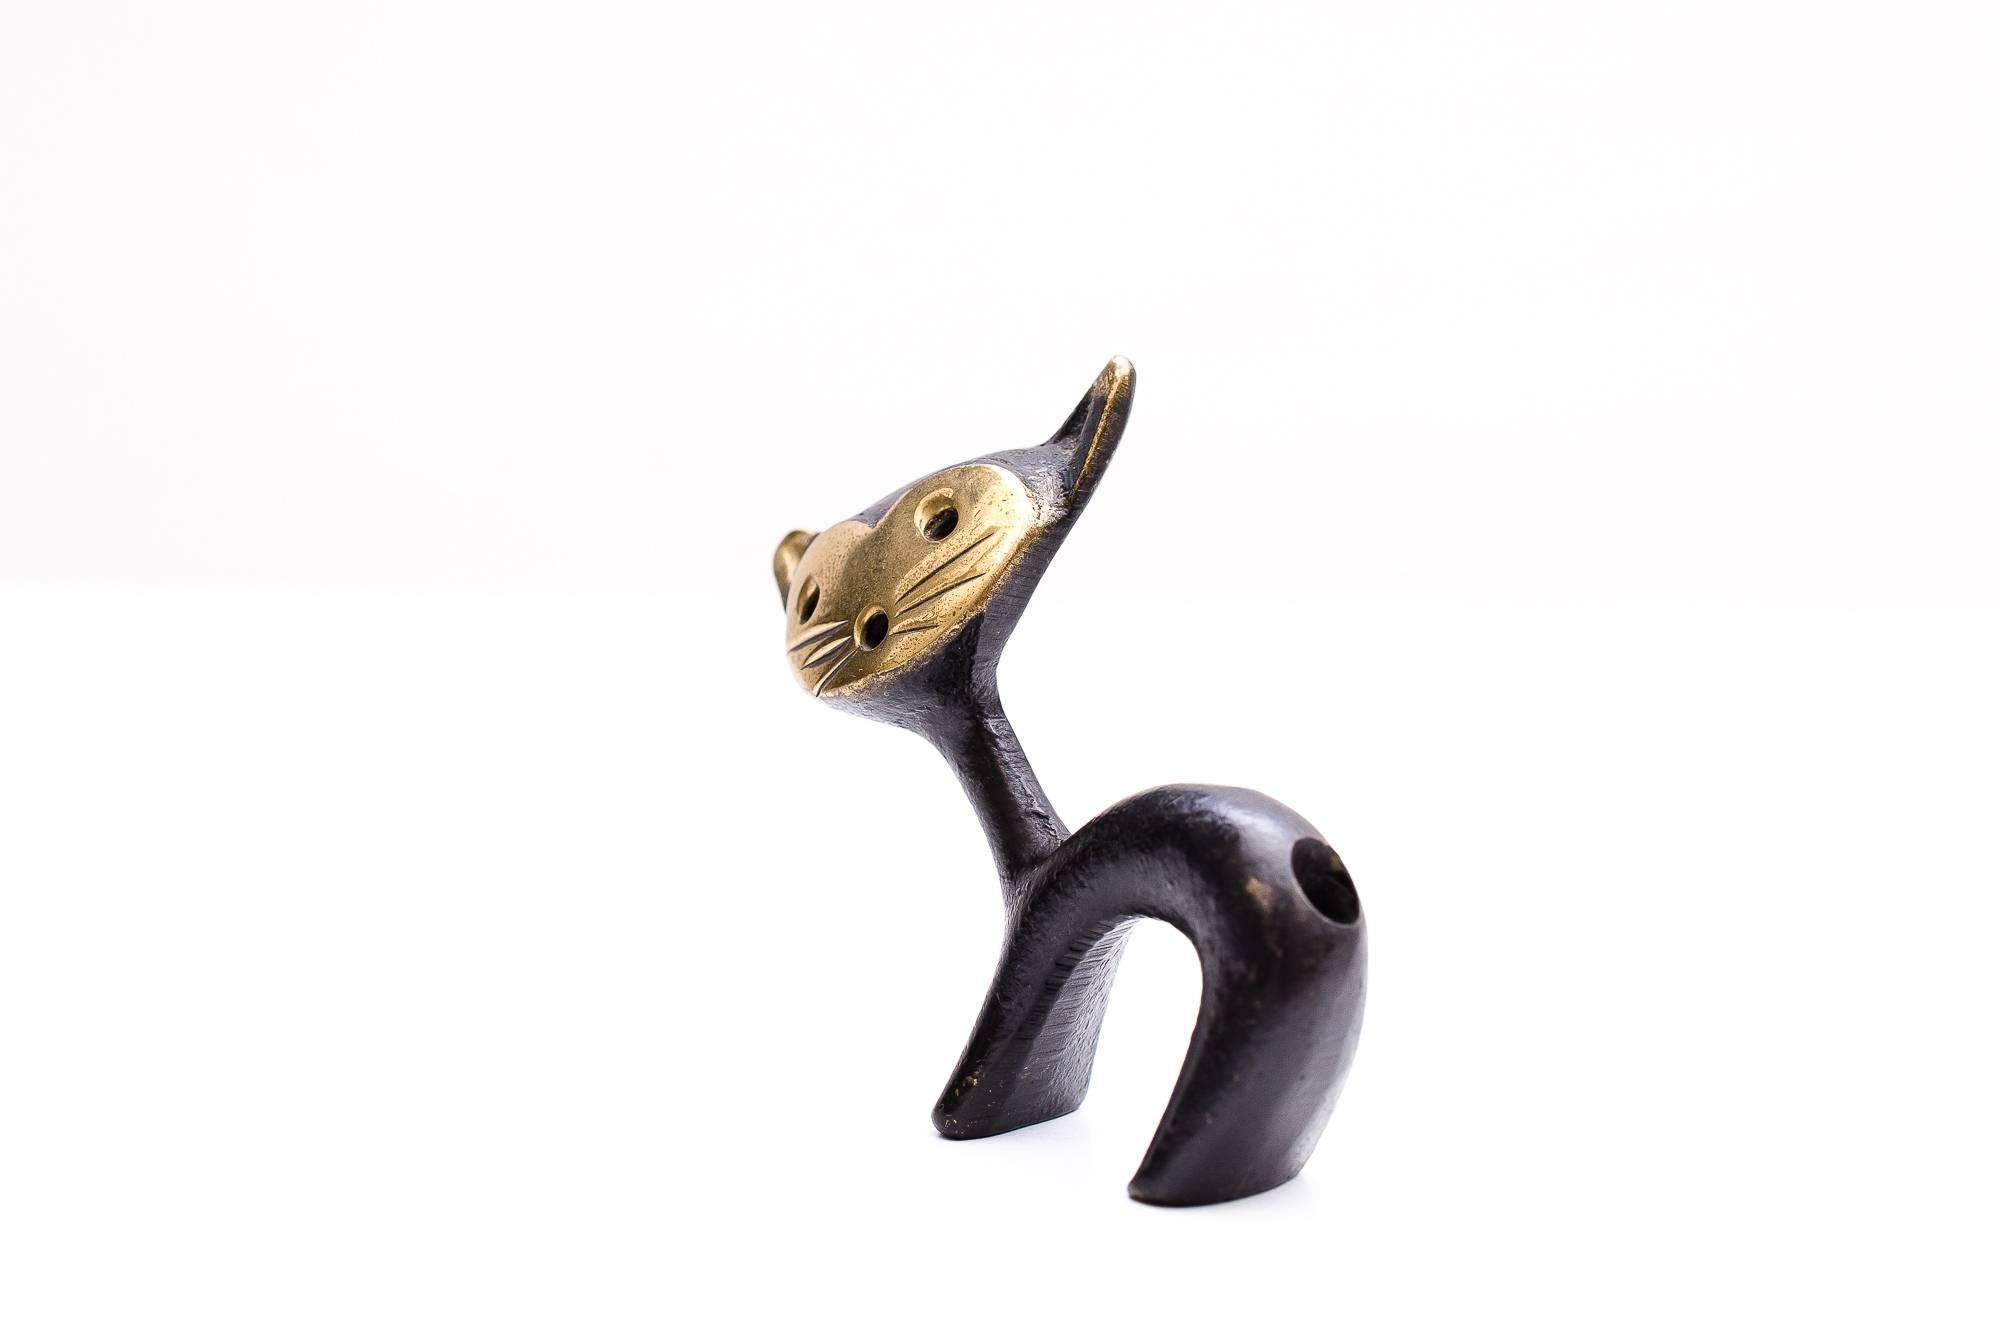 Cat pencil holder by Walter Bosse
Original condition.